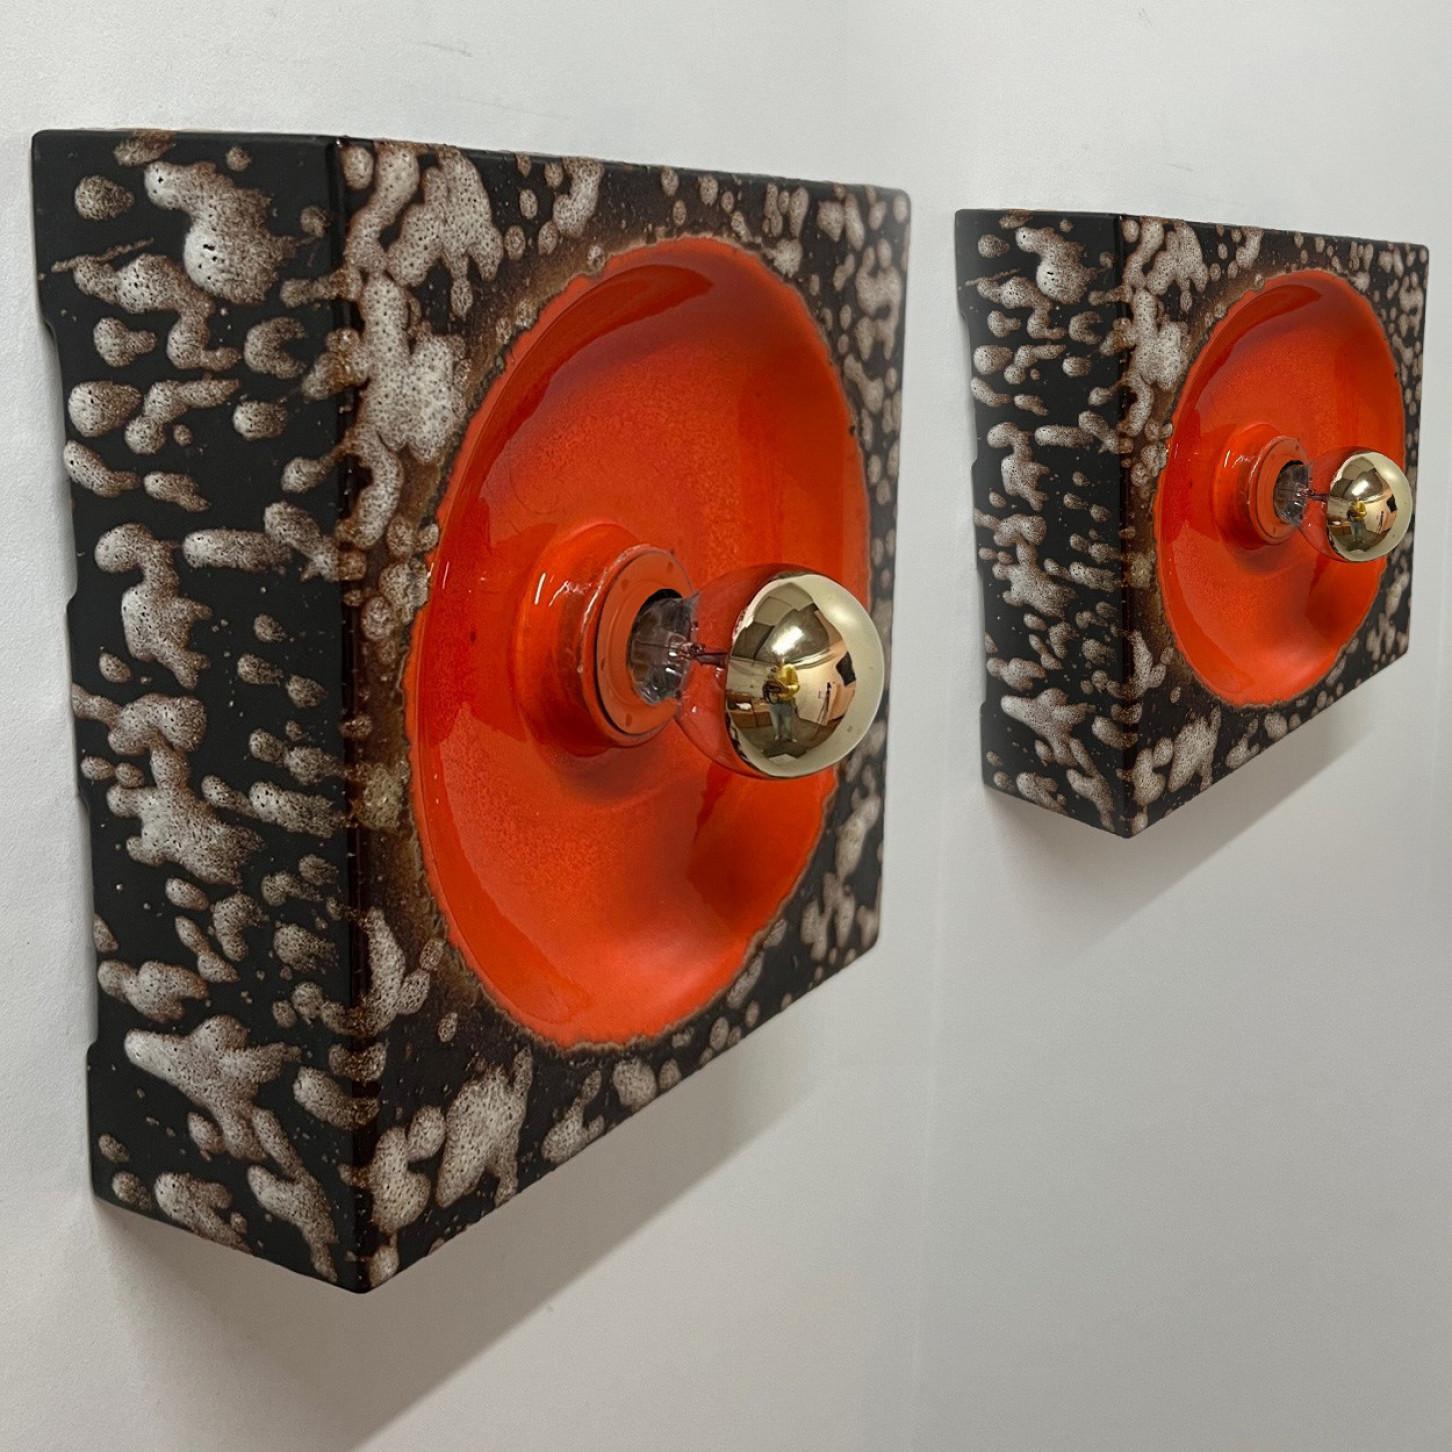 Brown beige orange ceramic wall lights manufactured by Hustadt Leuchten Keramik, Germany in the 1970s.

The glaze is in a taupe, red and brown color.

We used gold light bulbs (see images), but silver or white light bulbs are also very stylish (see